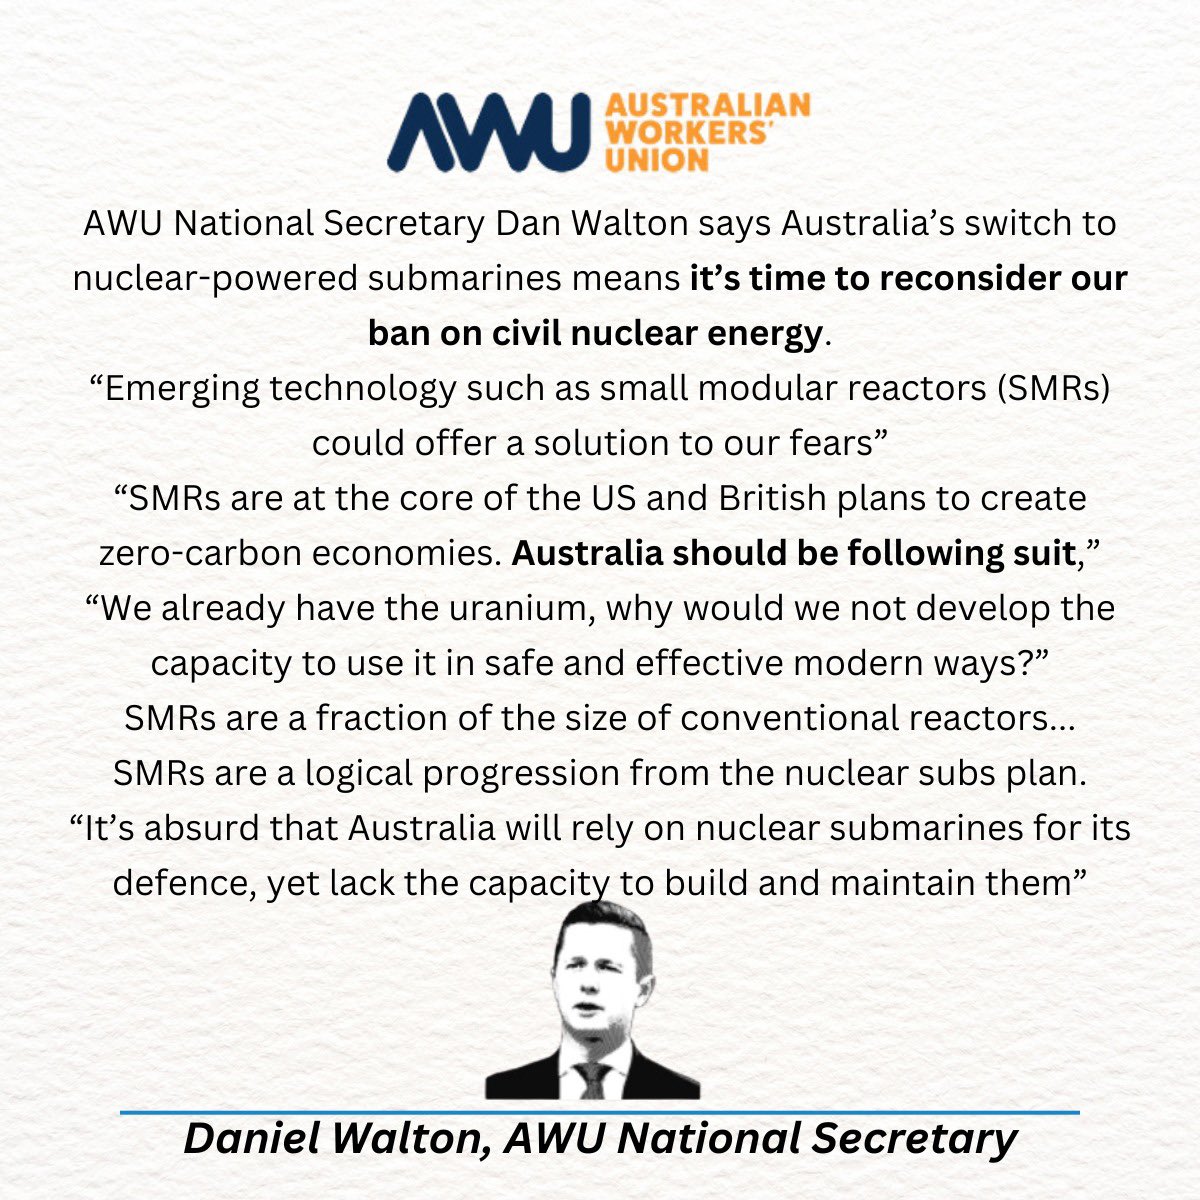 This Union boss is trying to pretend the AWU isn’t pro-nuclear. You have to wonder what has changed? He says the AWU hasn’t ‘entered the debate’ — well he might have missed this contribution: awu.net.au/national/news/…